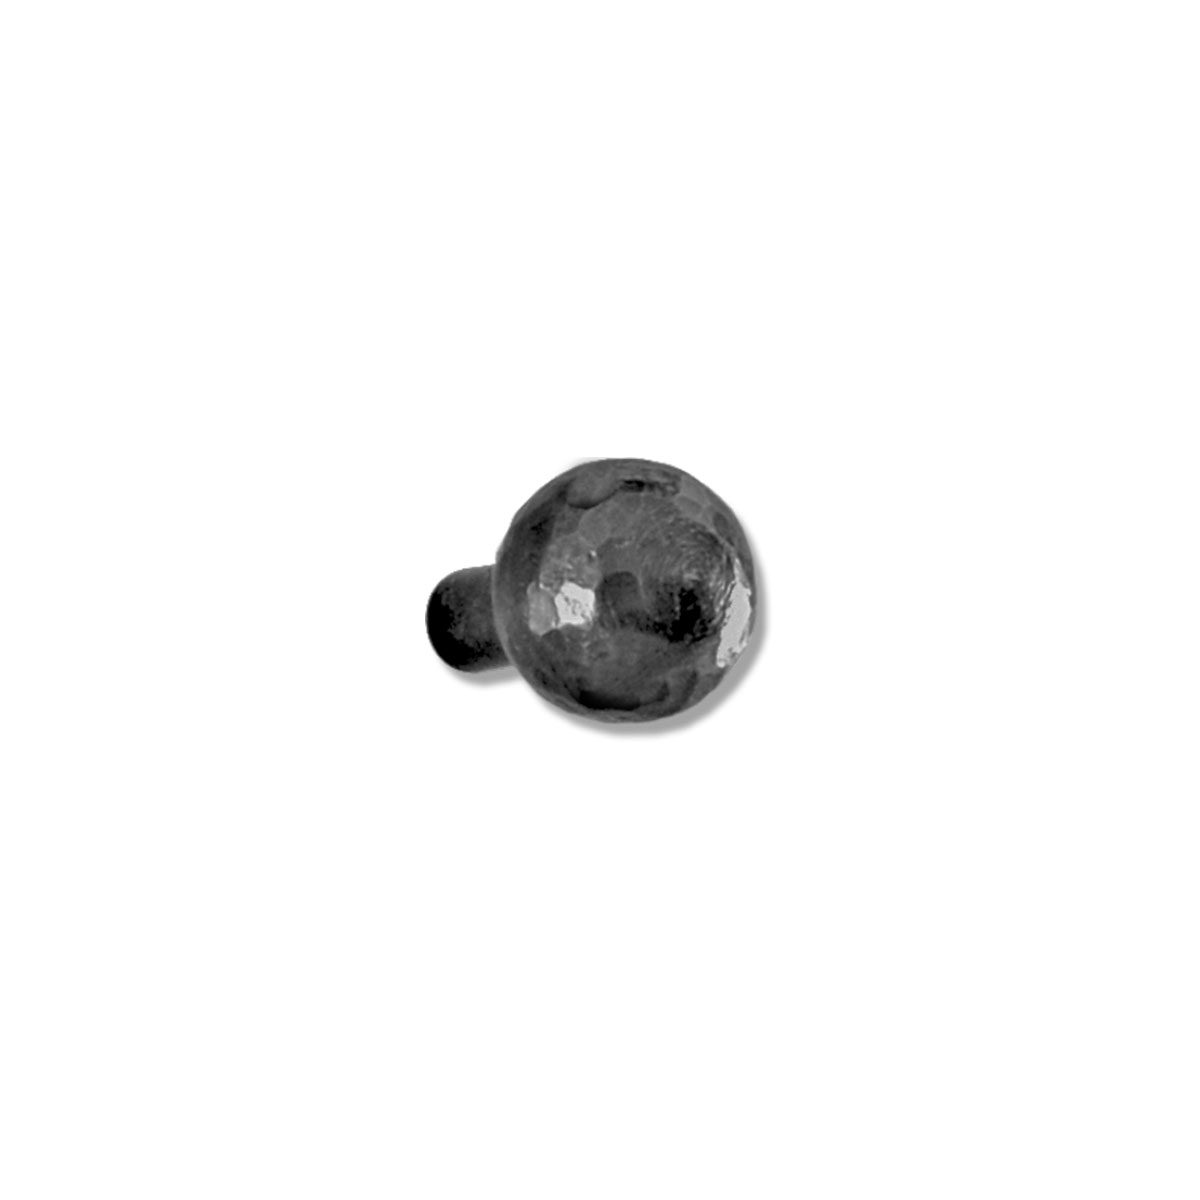 Hand Forged Iron Forged Drawer Knob 